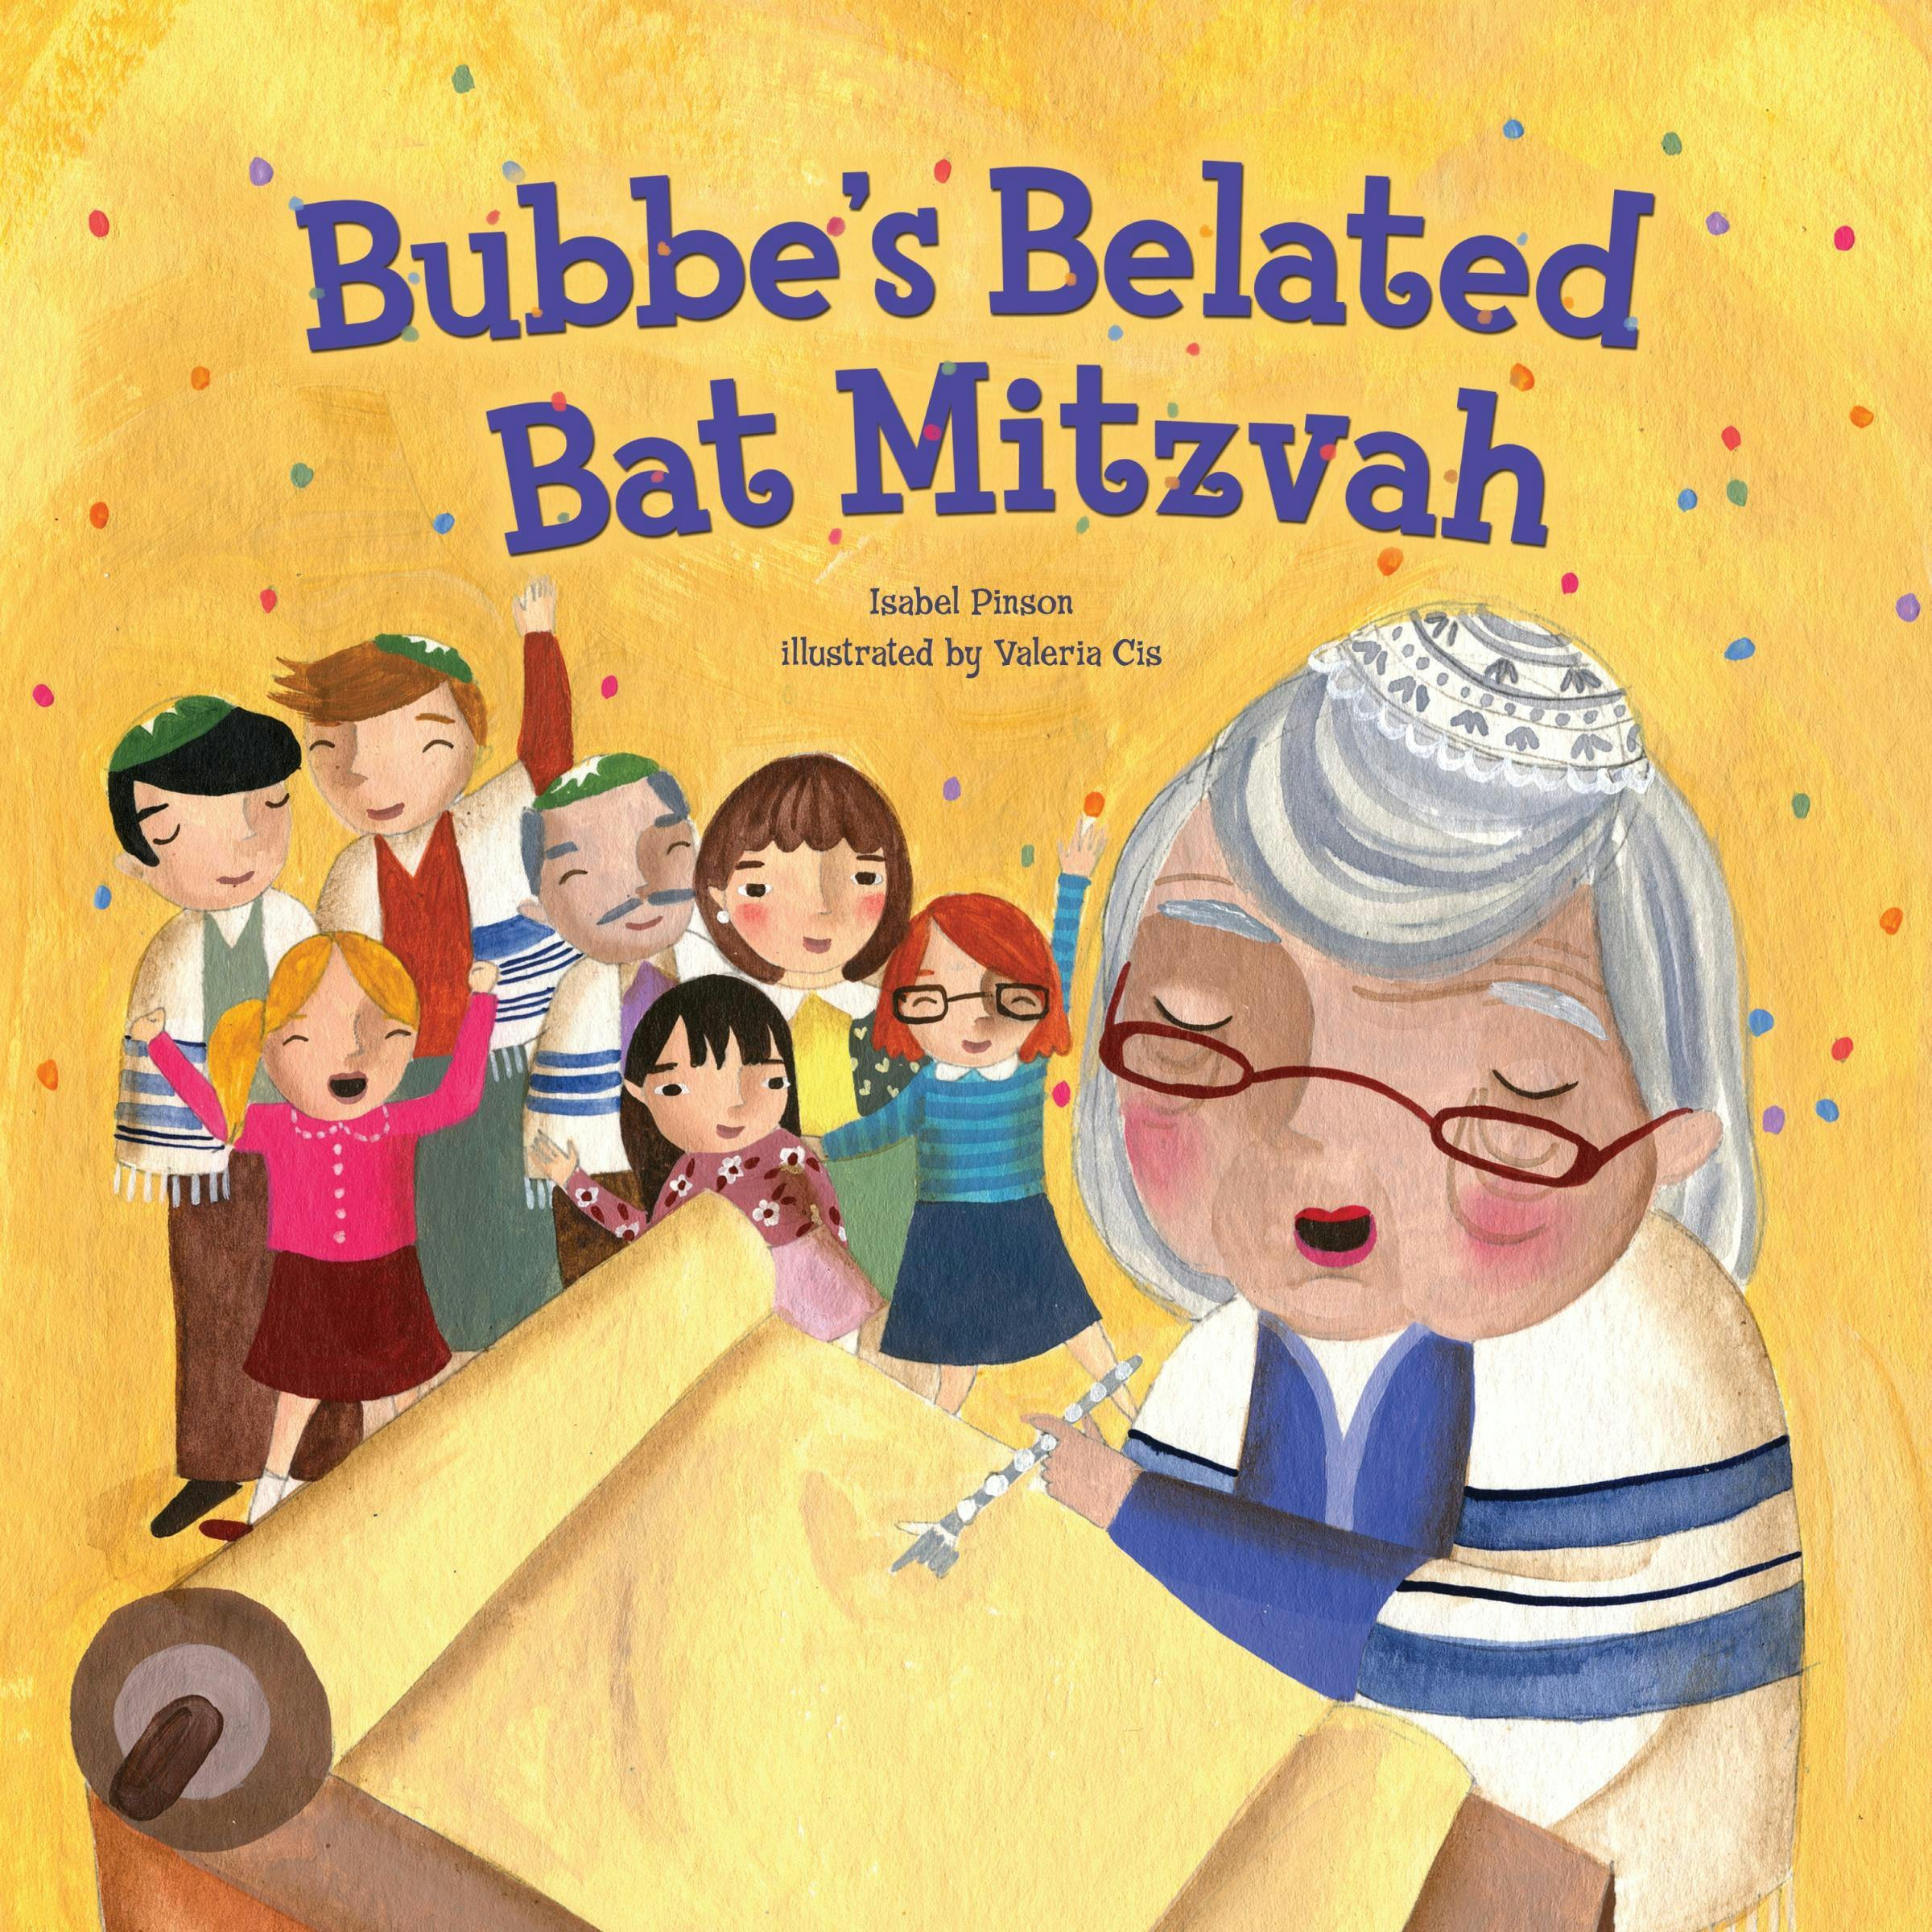 Bubbe's Belated Bat Mitzvah - Isabel Pinson